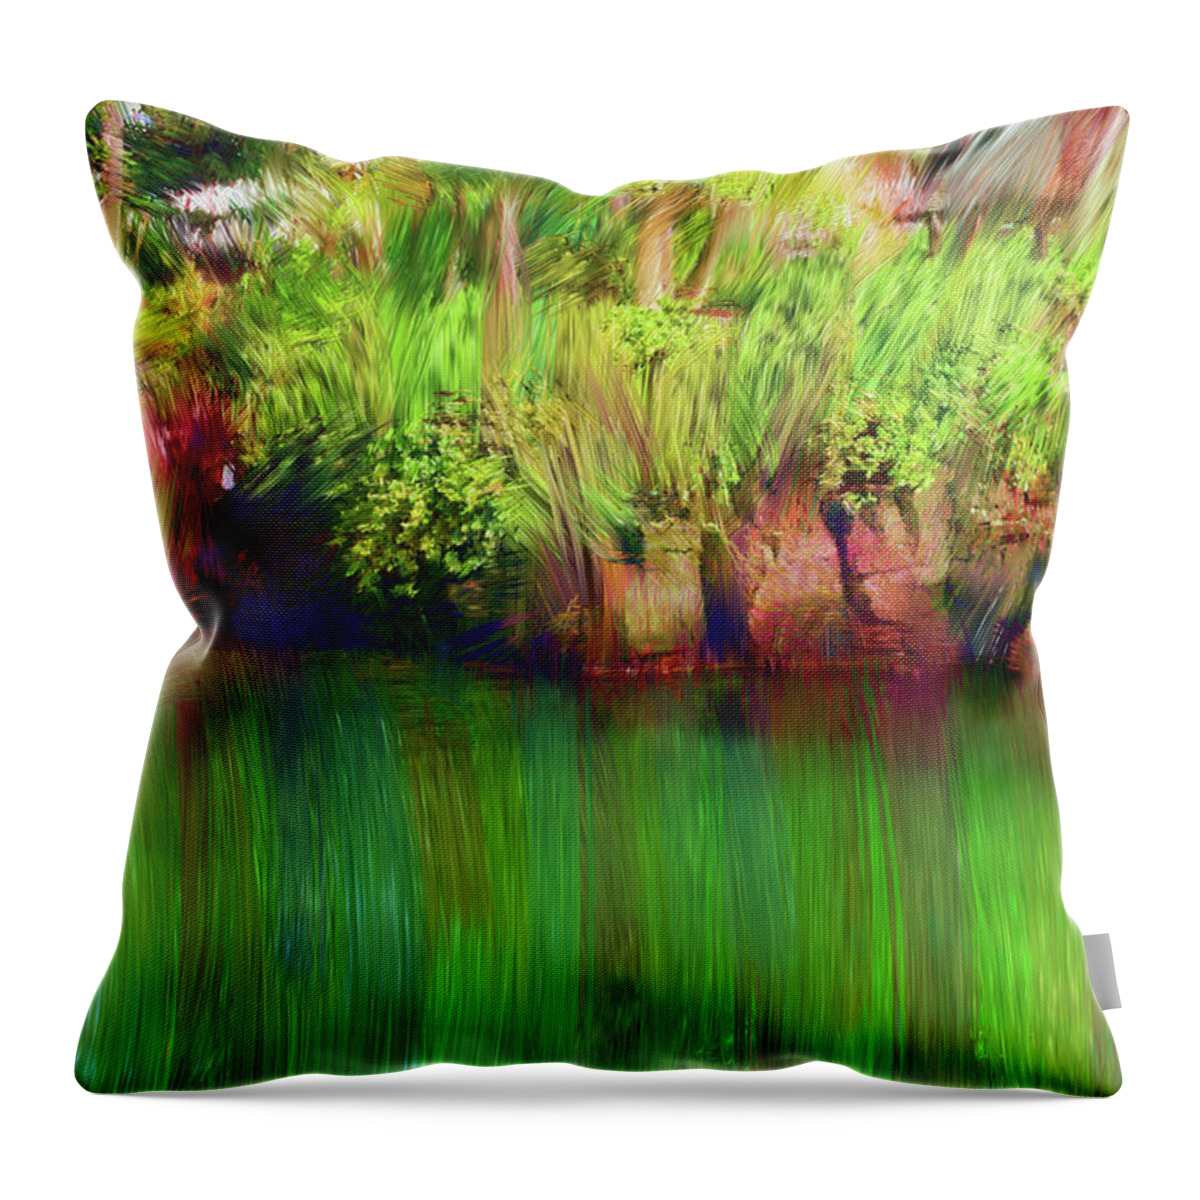 Nature Throw Pillow featuring the digital art By the Pond by Karen Nicholson